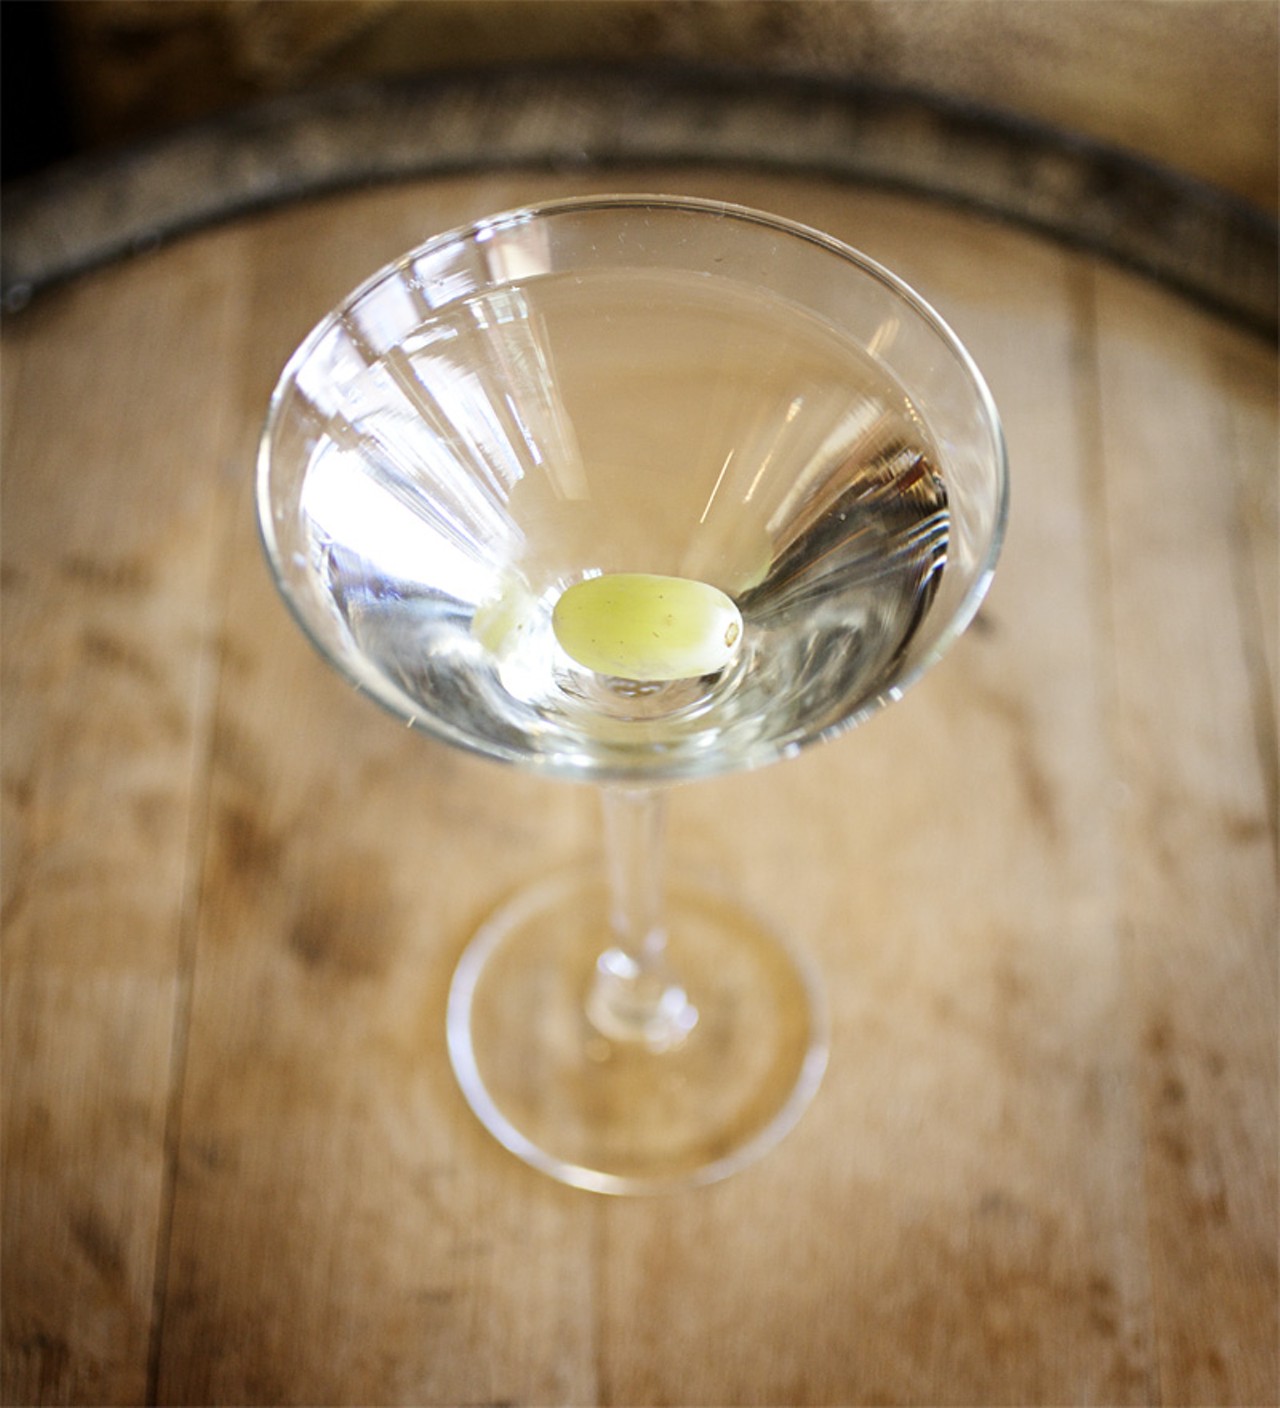 The One19-ini is made with Skyy Vodka, white grape juice and a frozen green grape.